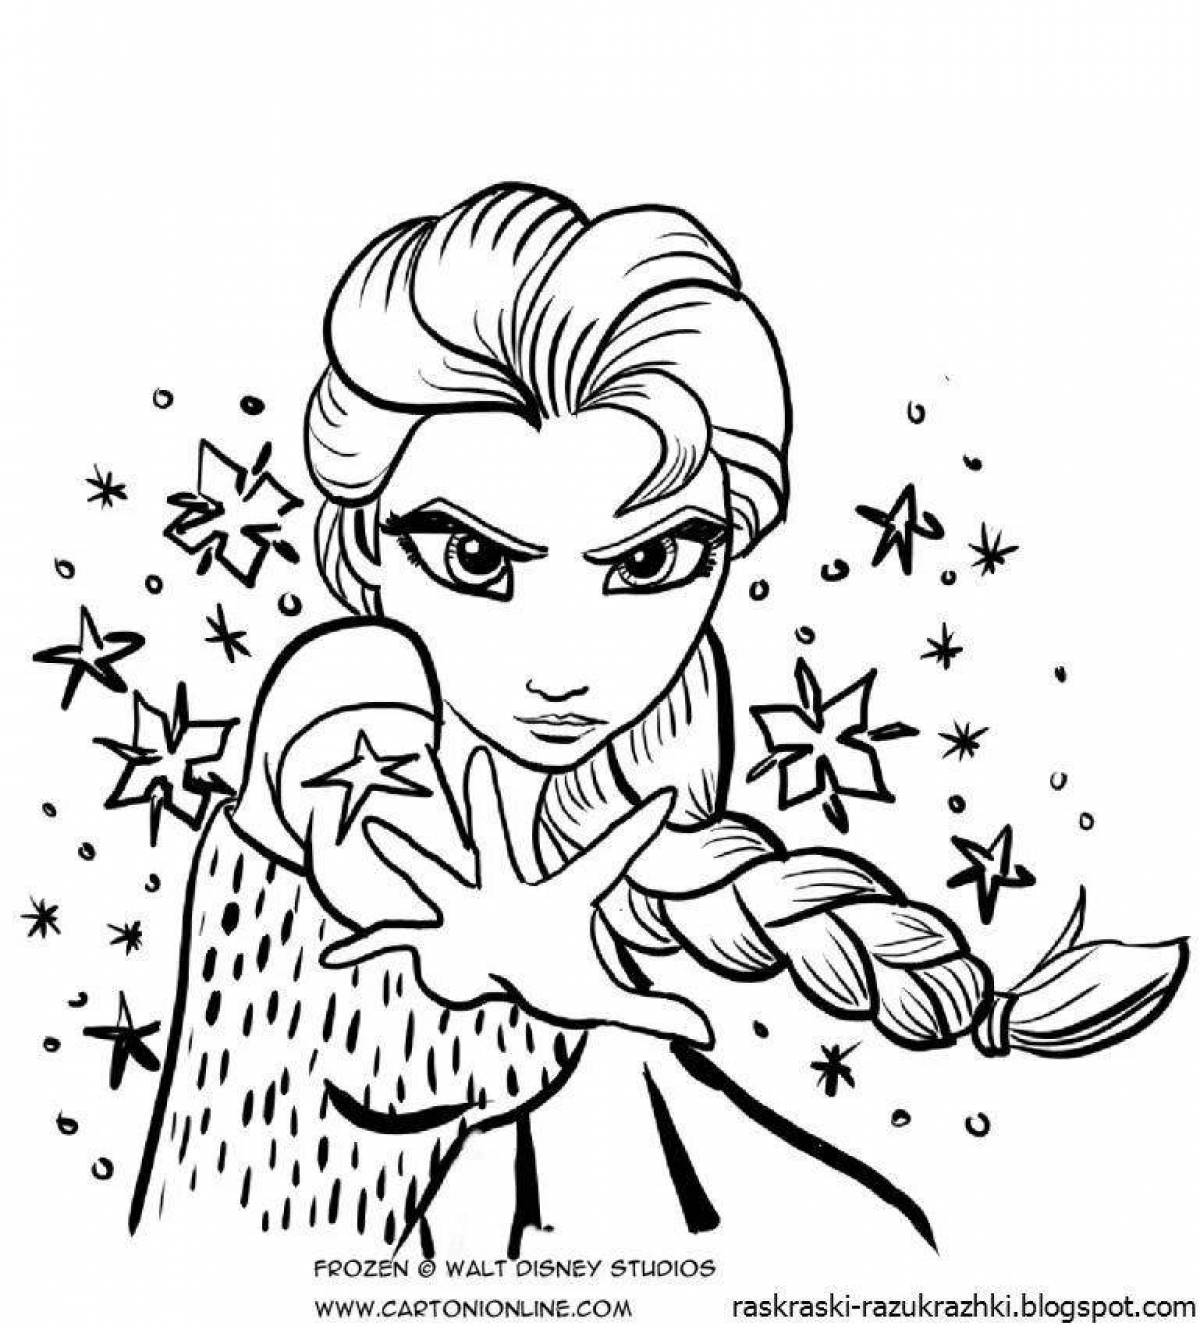 Fairy cold heart coloring page for 5-6 year olds